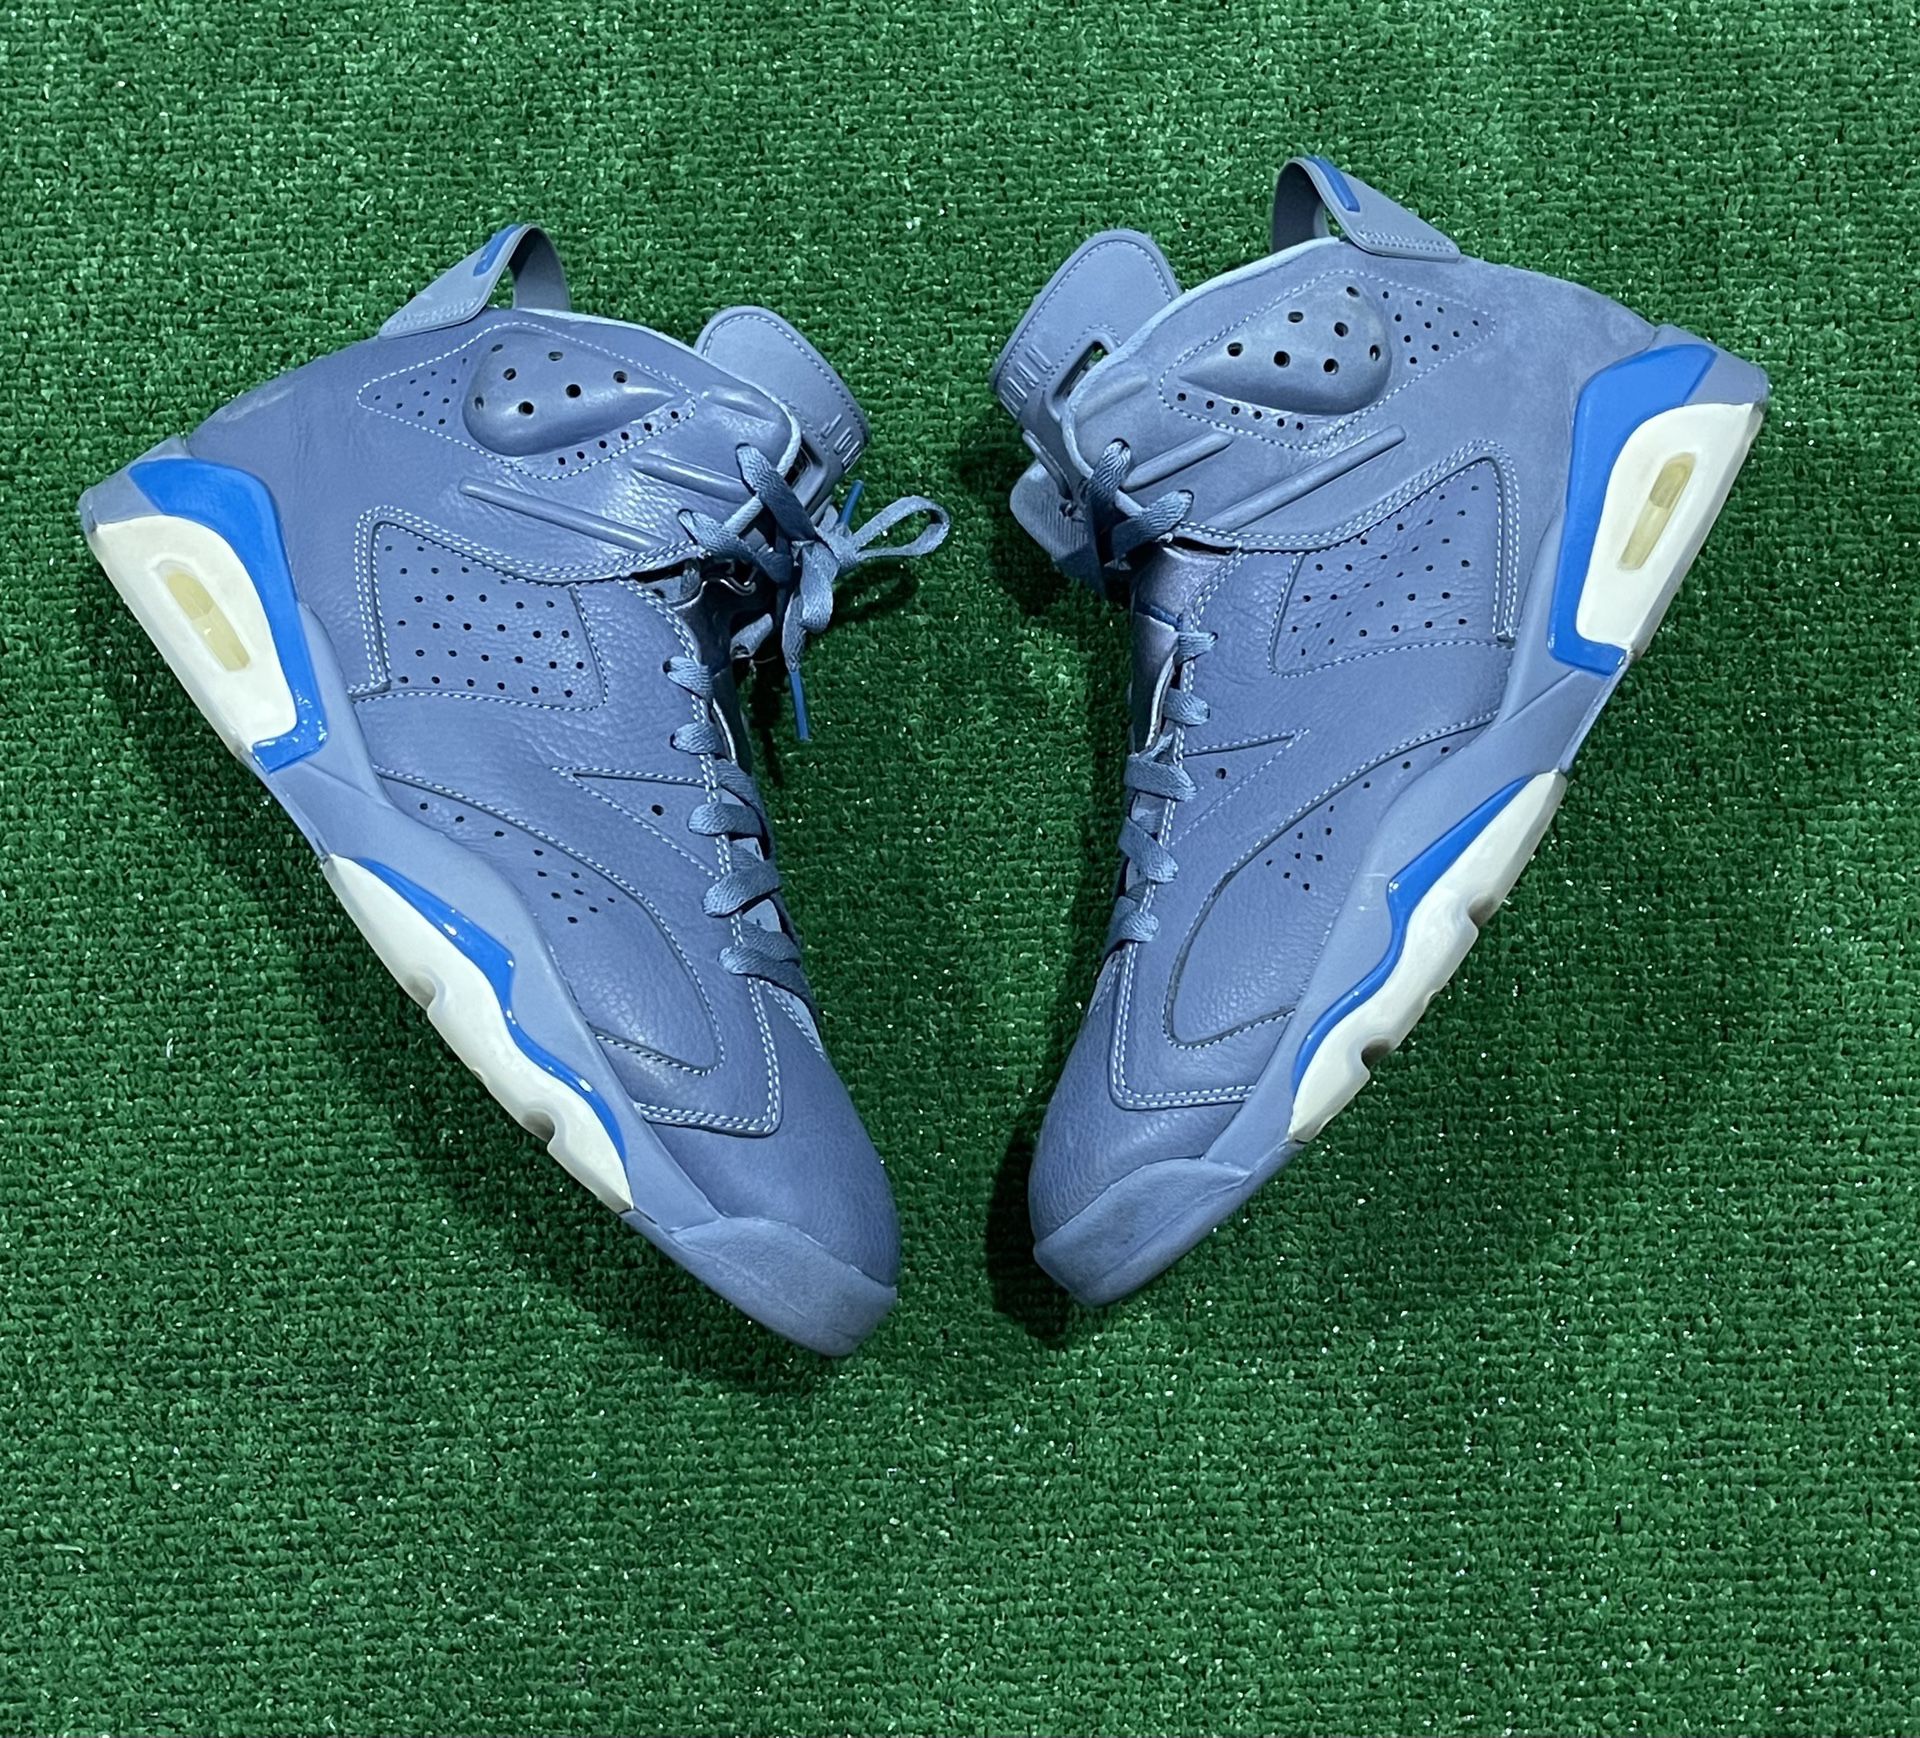 Jordan 6 size 13 Used With No Box Or Best Offer 